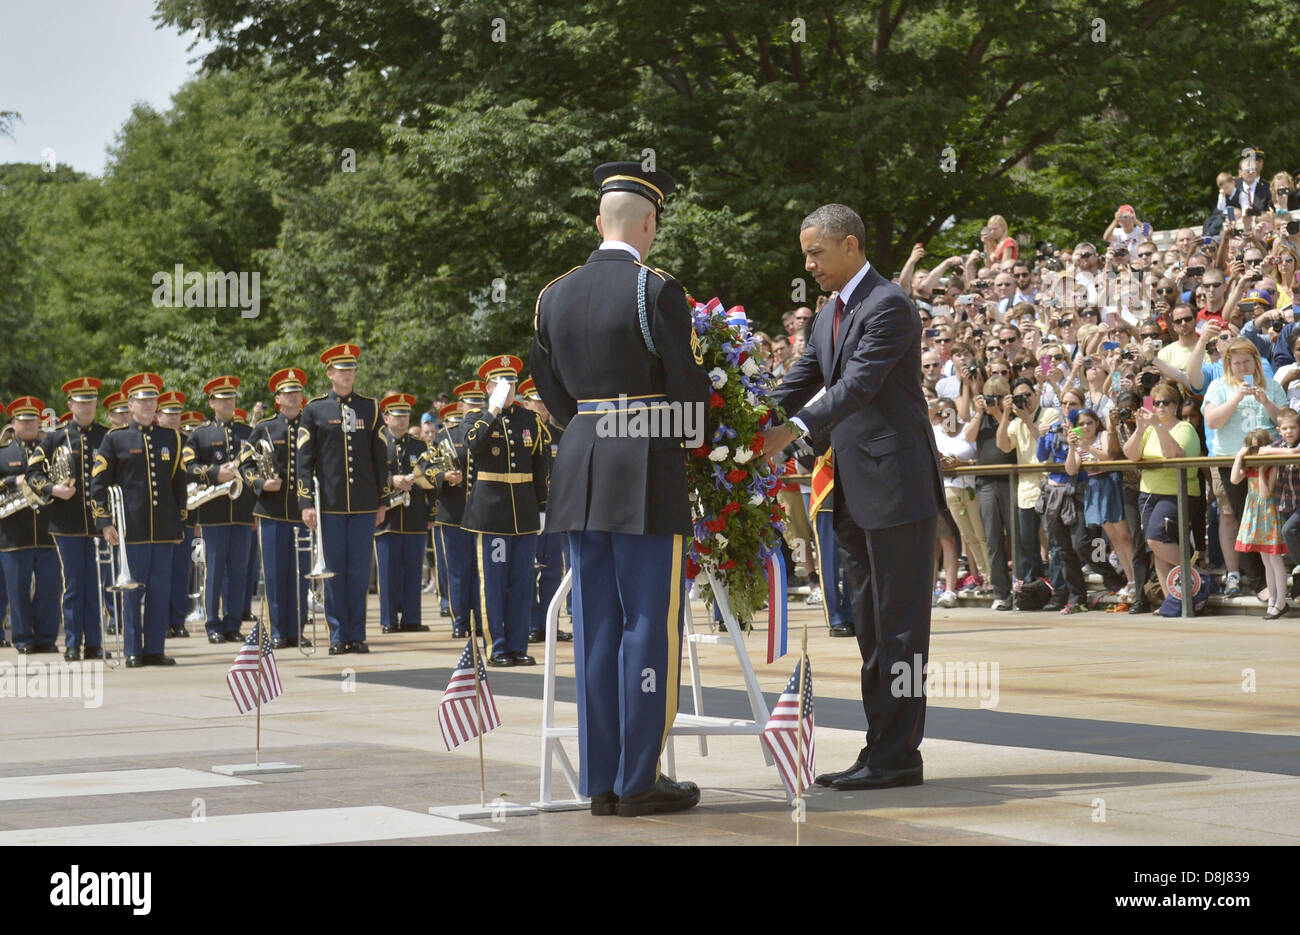 US President Barack Obama places a wreath on the Tomb of the Unknown Soldier in honor of Memorial Day at Arlington National Cemetery May 27, 2013 in Arlington , VA. Stock Photo